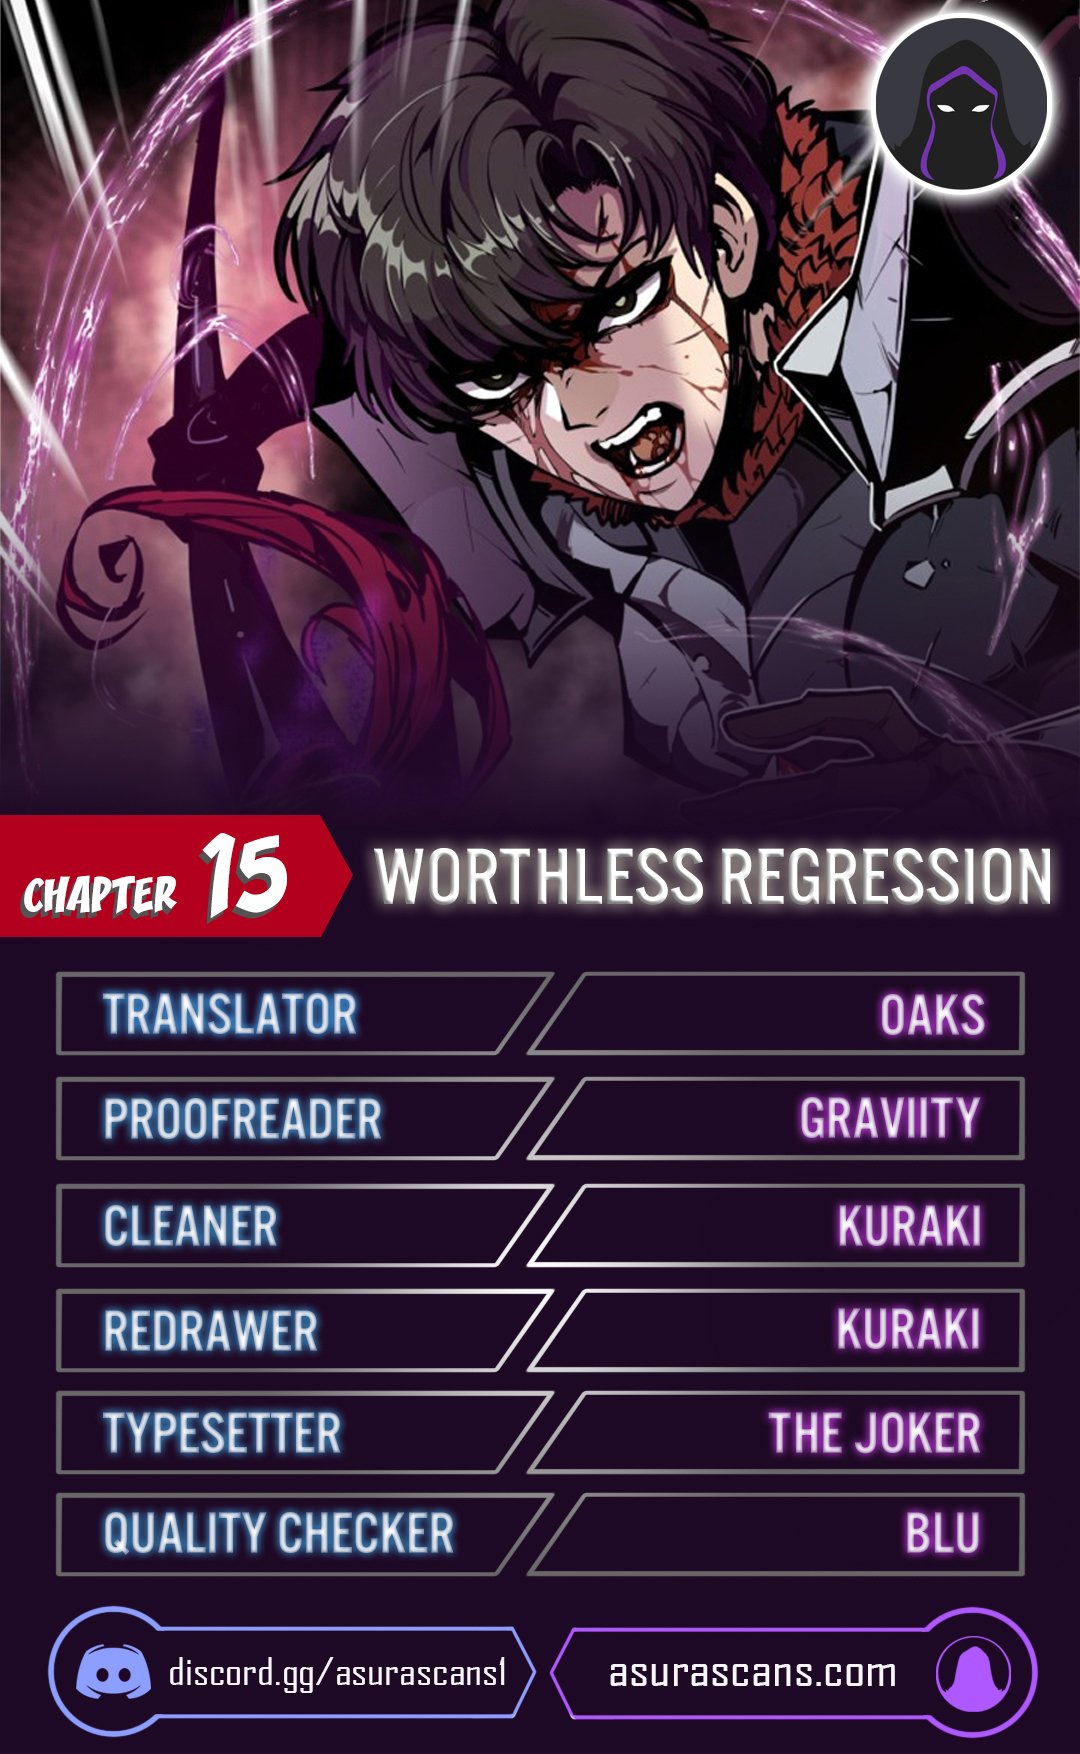 Worthless Regression - Chapter 20453 - Image 1